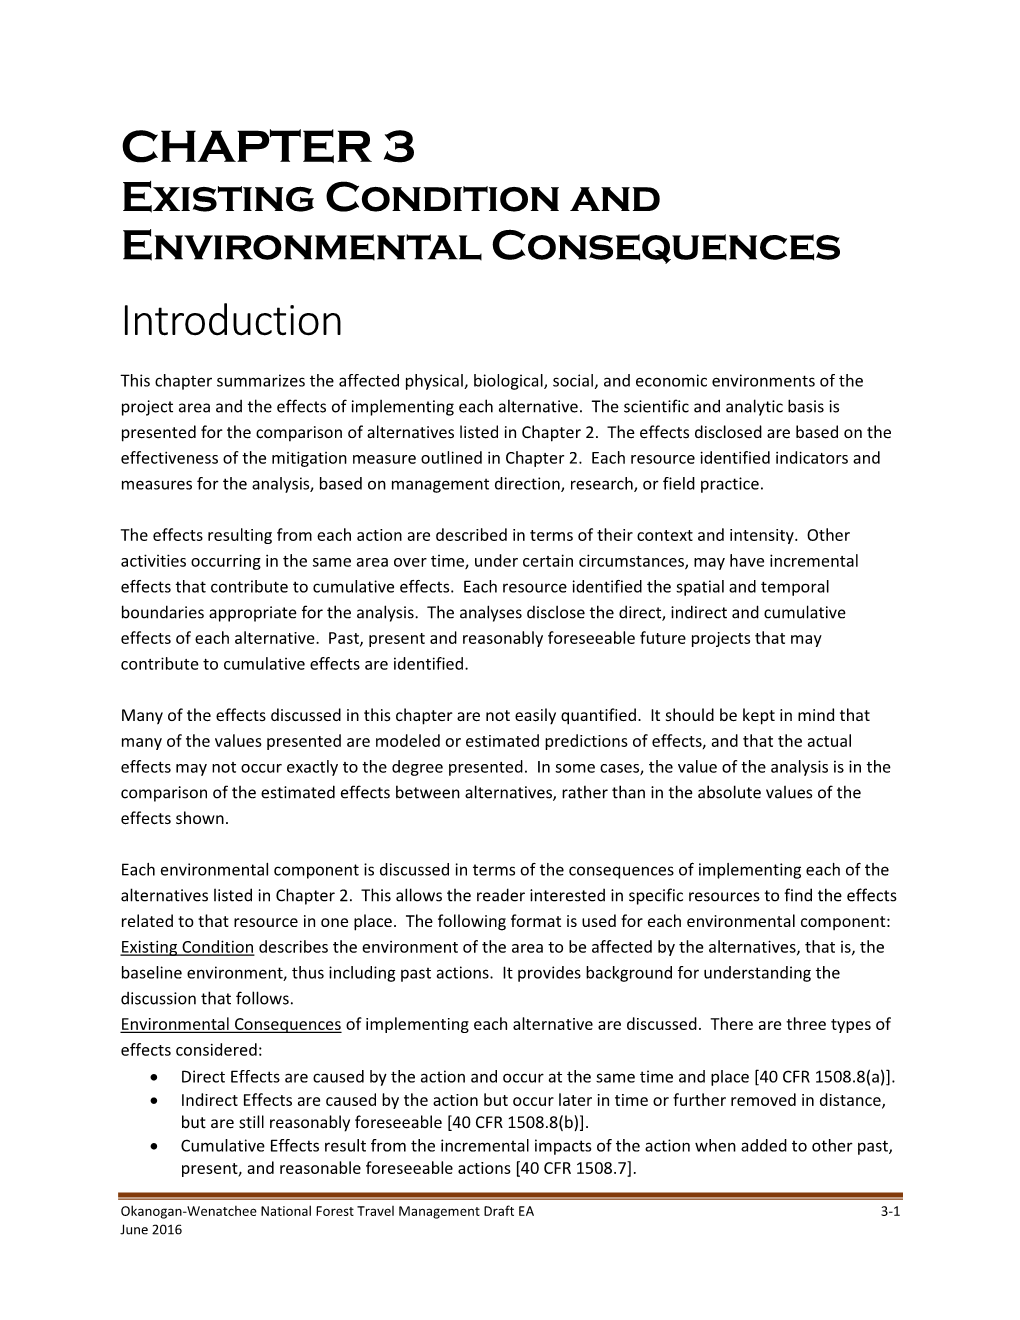 CHAPTER 3 Existing Condition and Environmental Consequences